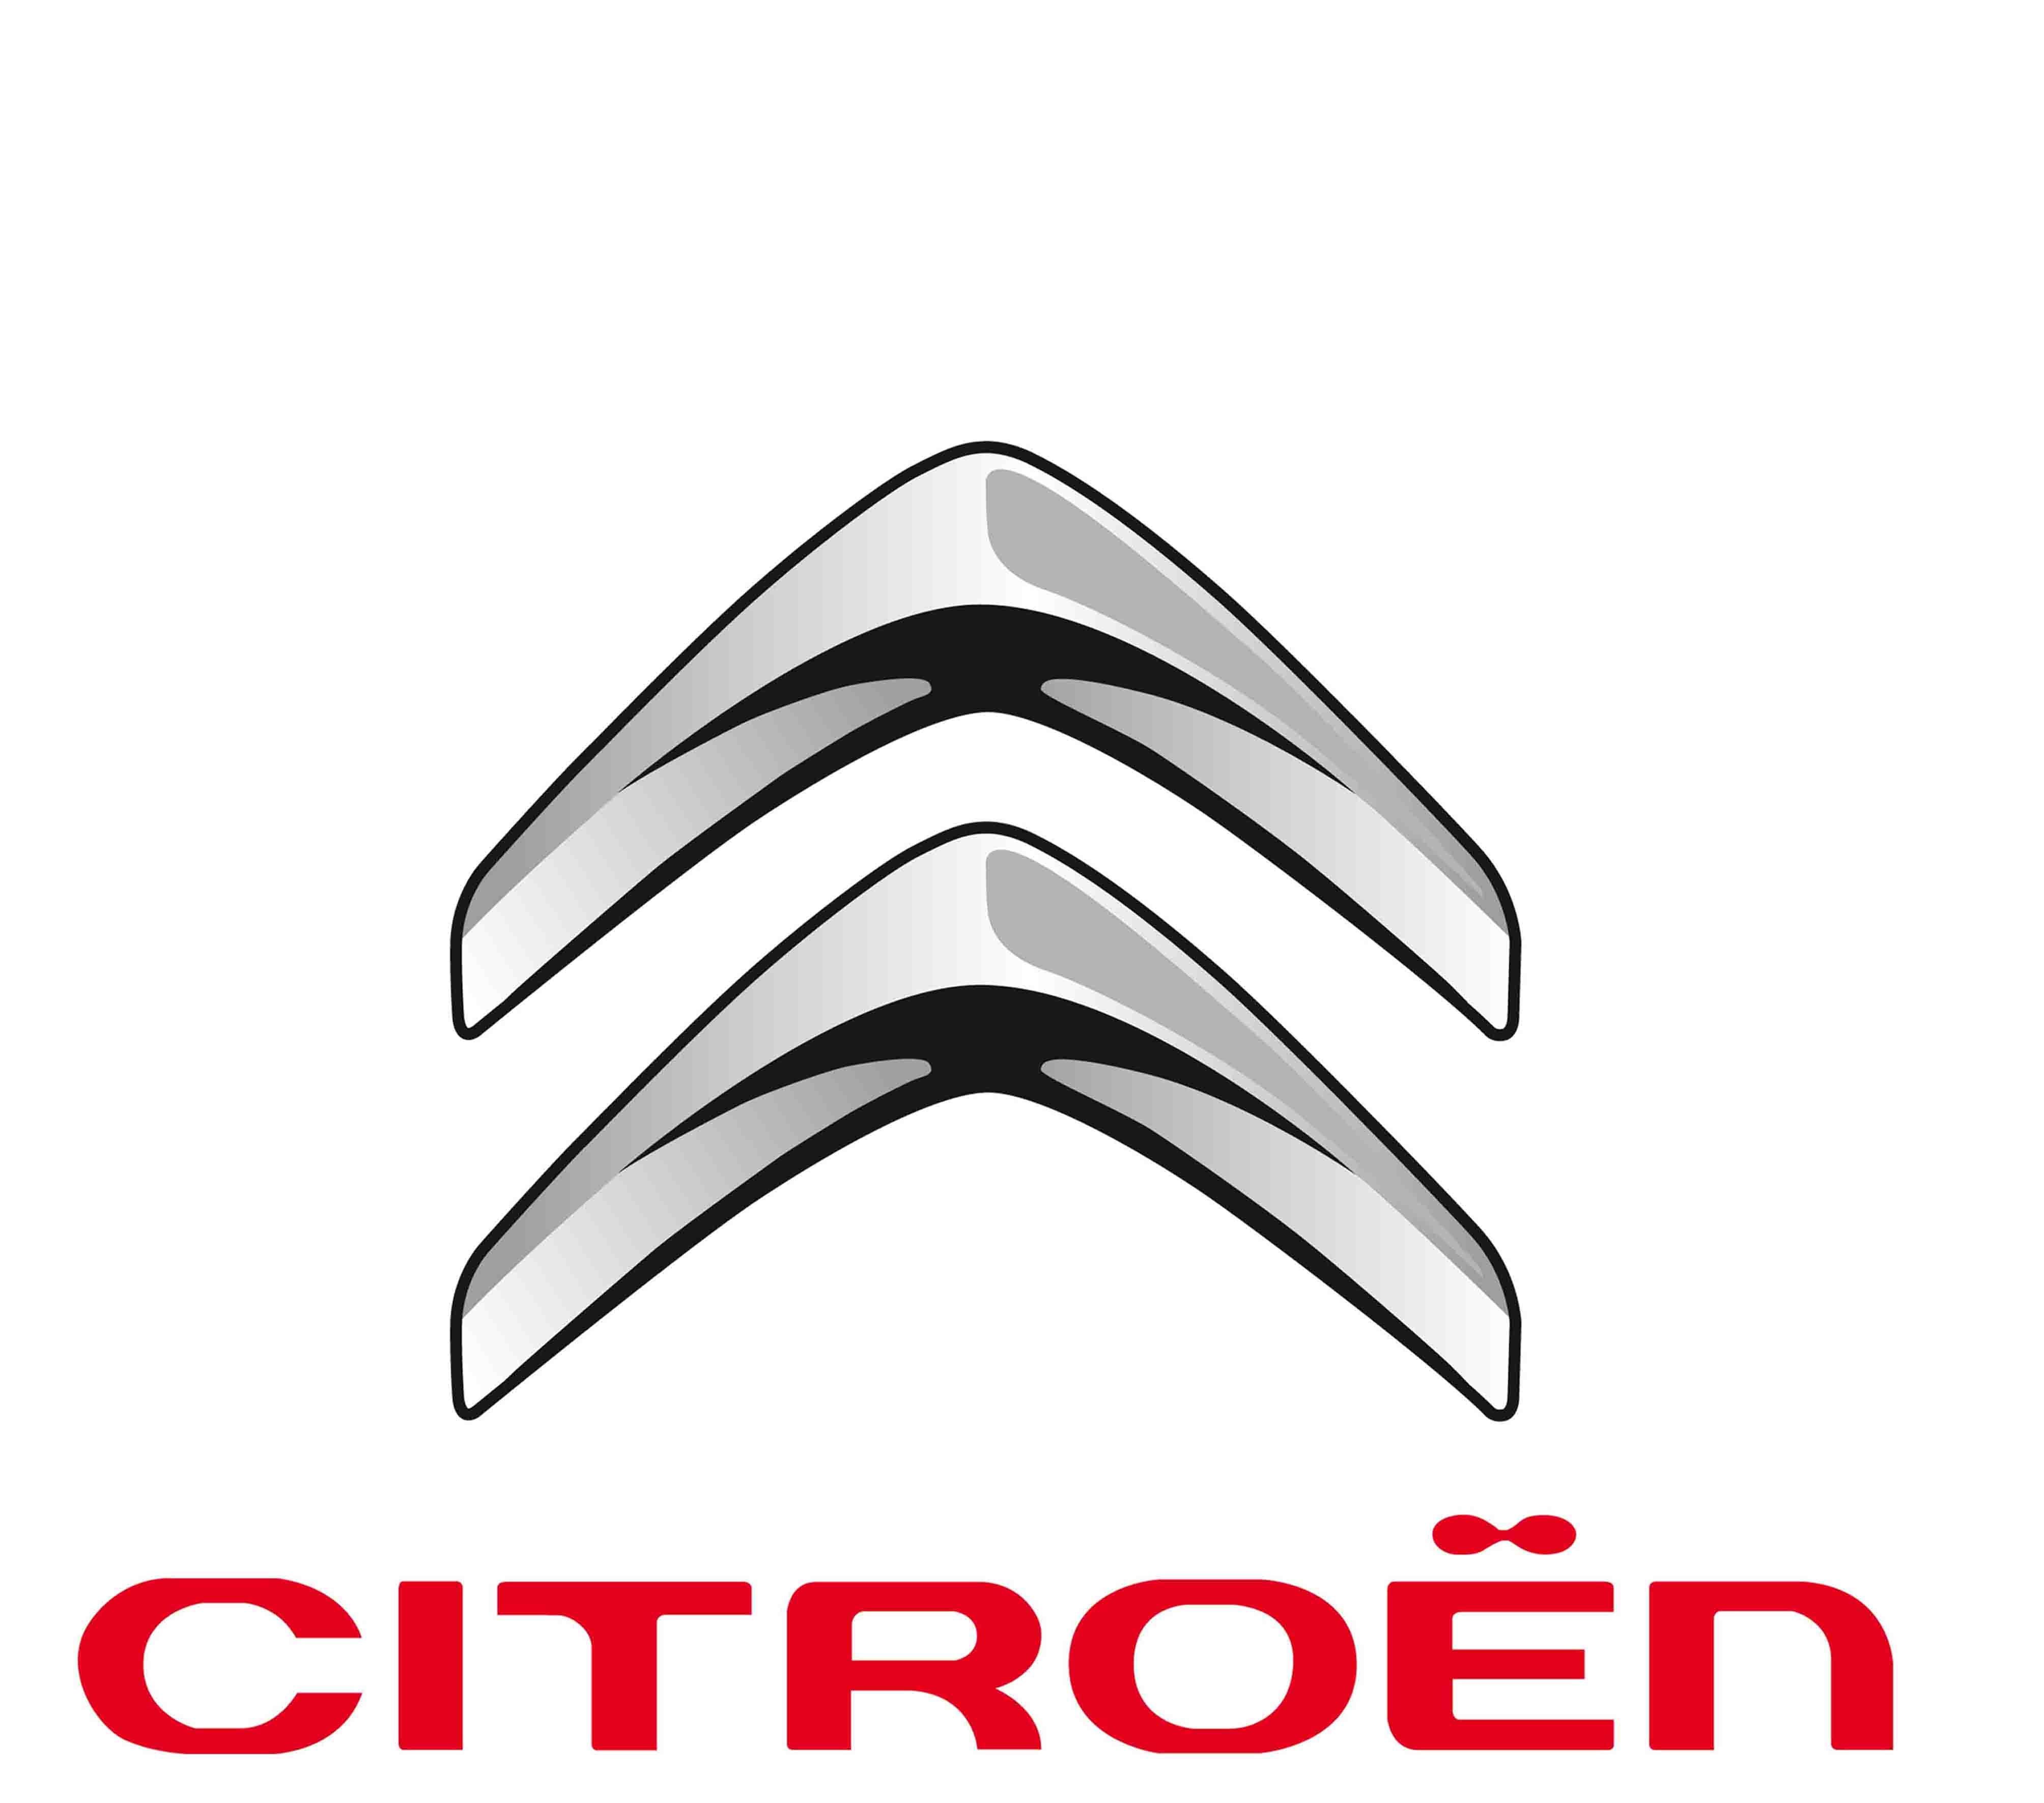 Citroën Inspired by You